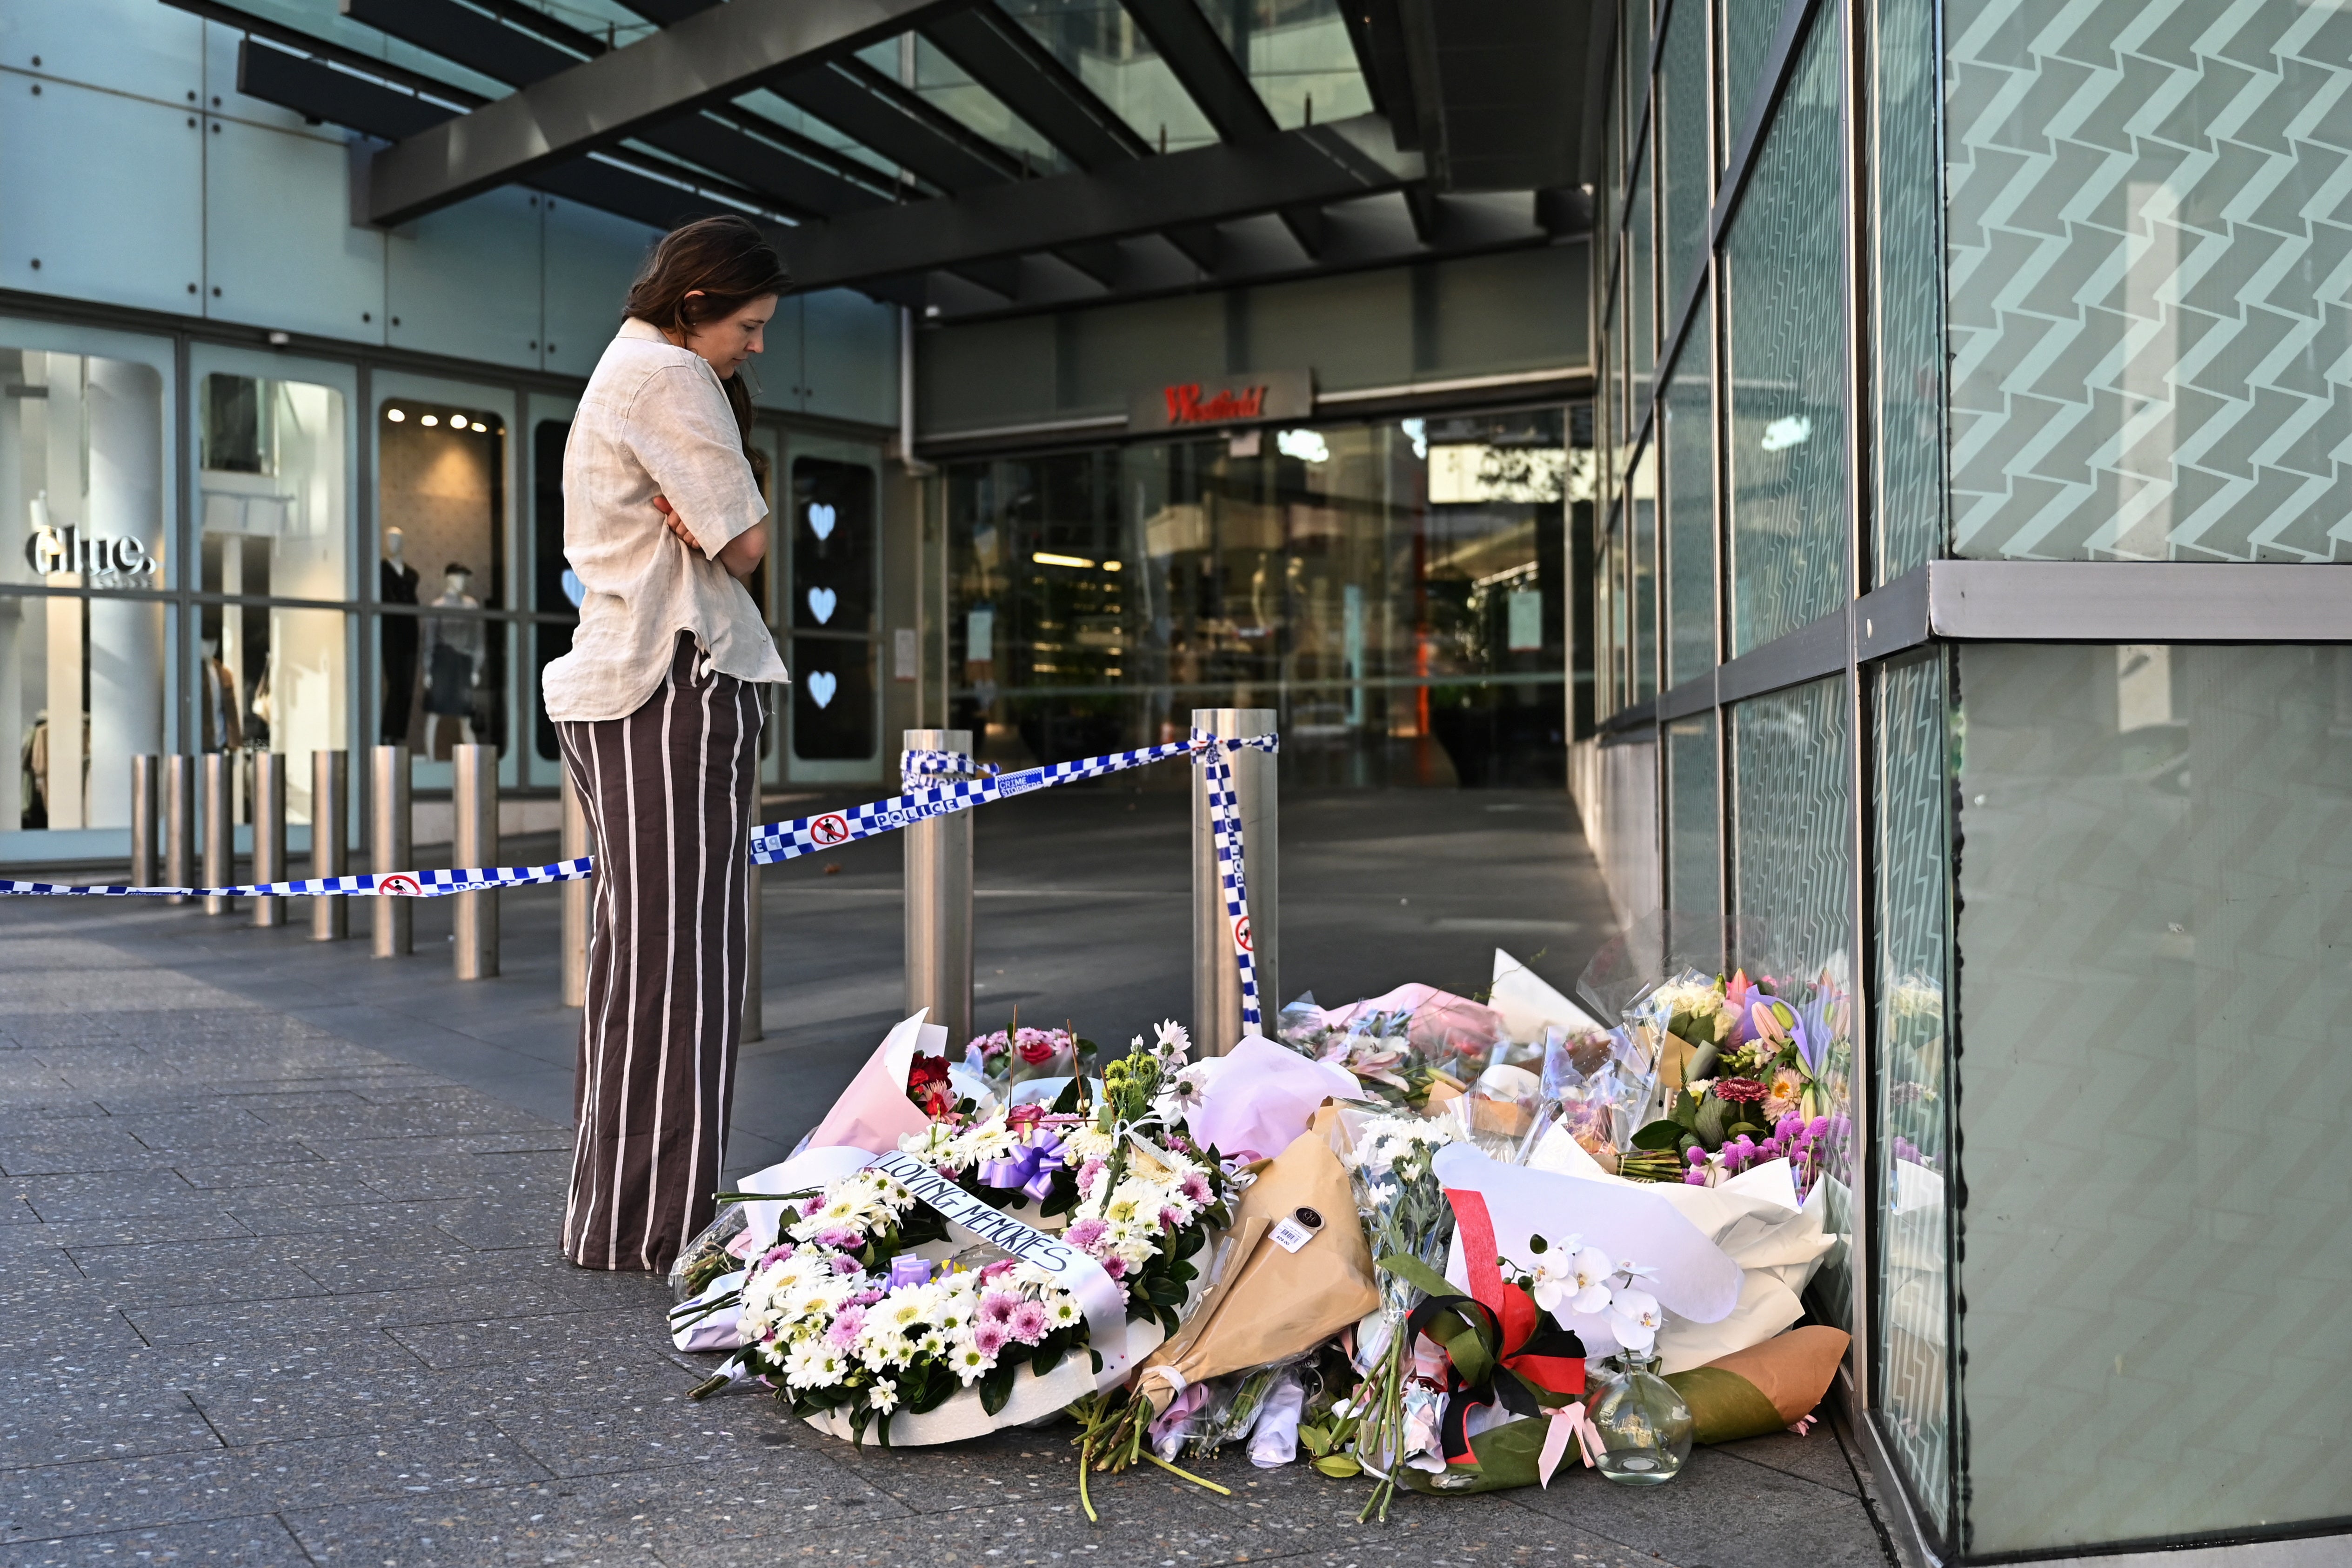 A person looks at floral tributes for victims of the attack left at the entrance to Westfield Bondi Junction shopping centre in Sydney